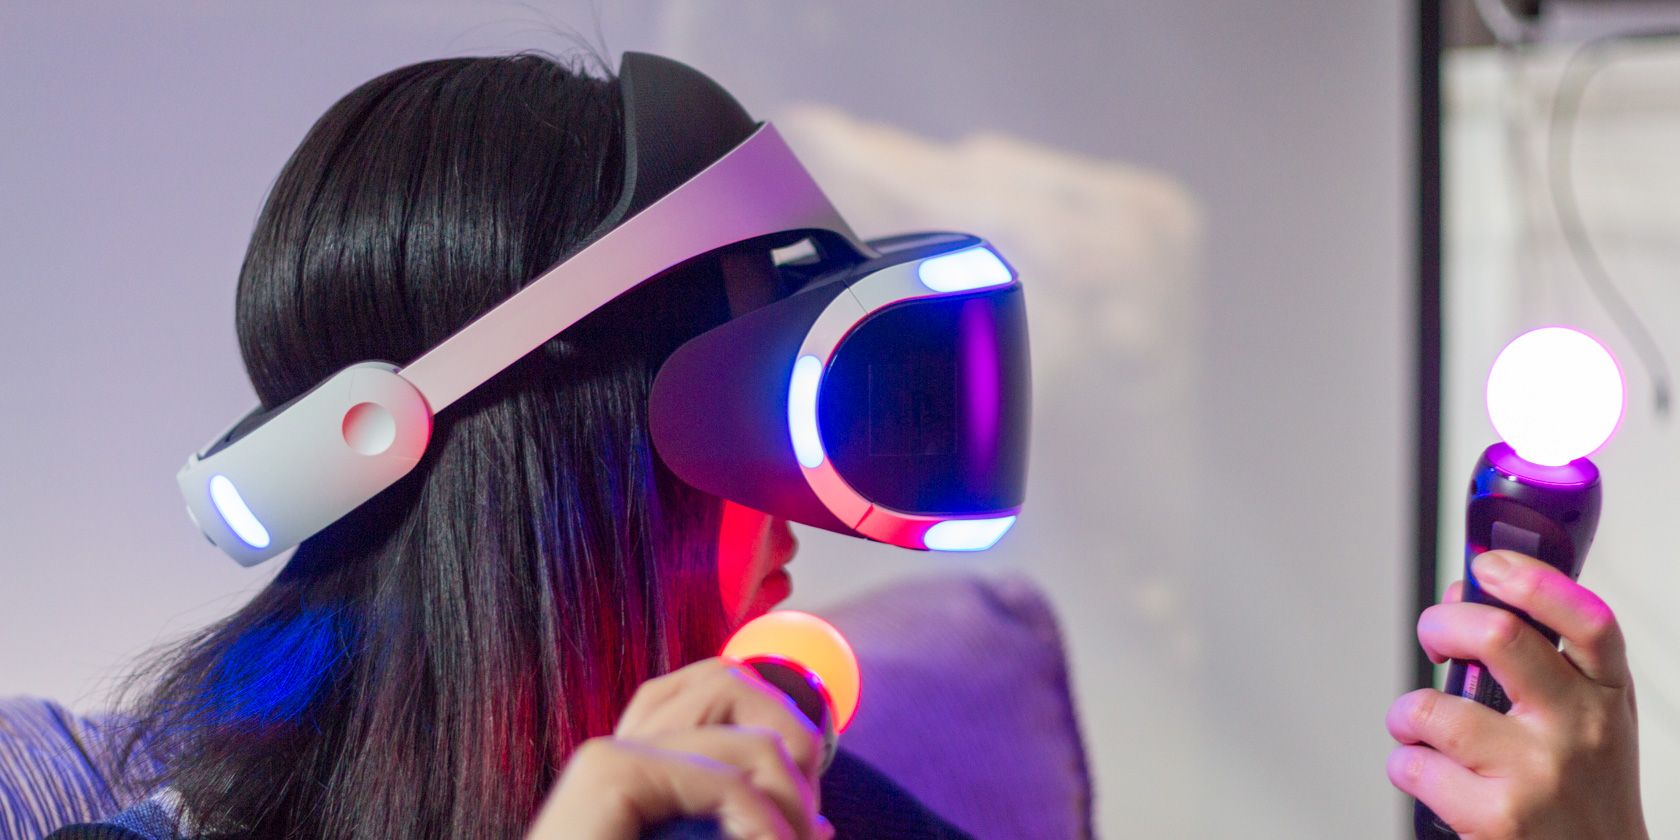 PSVR headset and controls being used by a woman